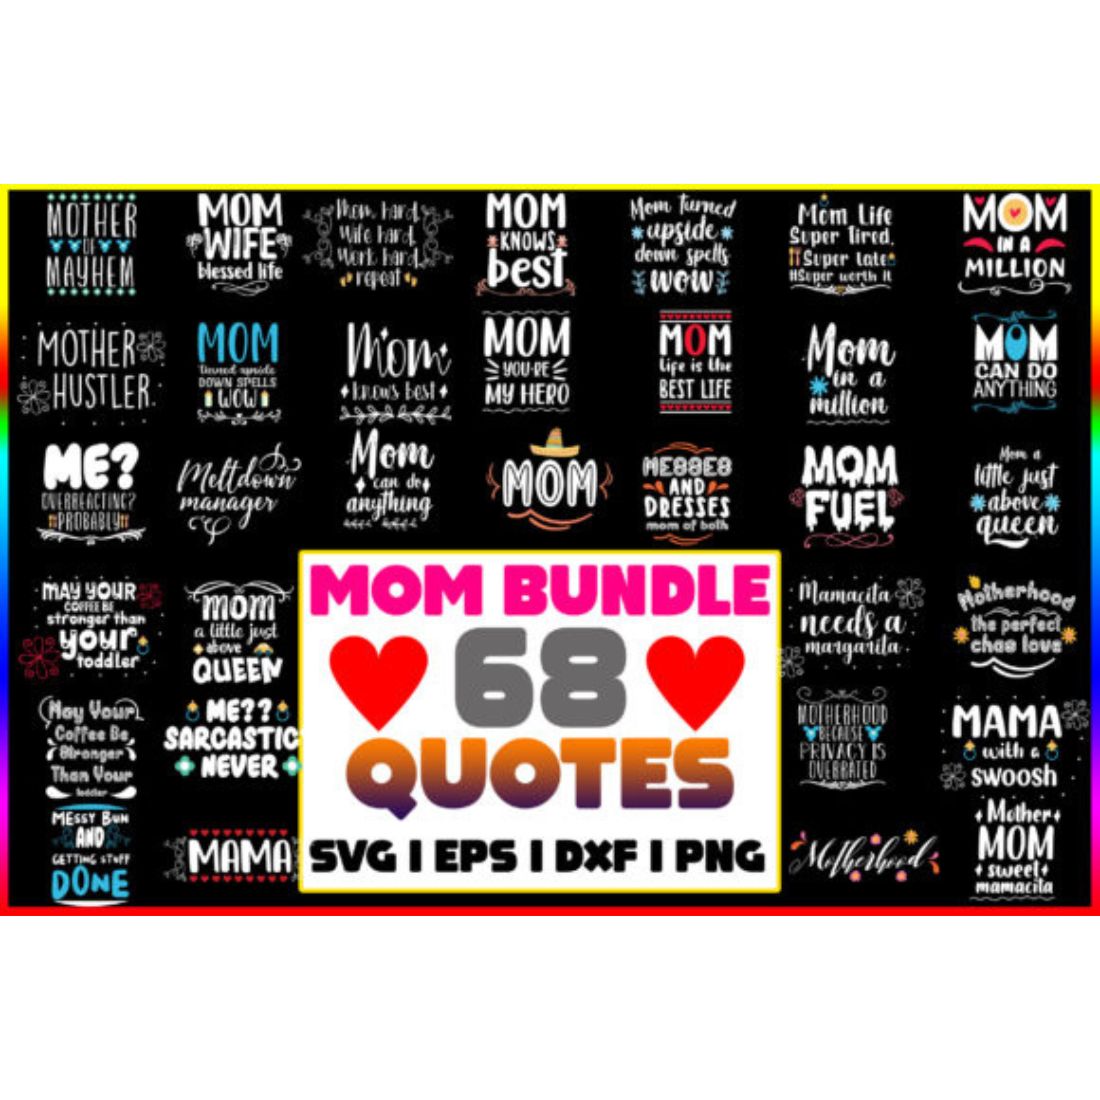 Happy Mother Day Quotes Bundle main cover.